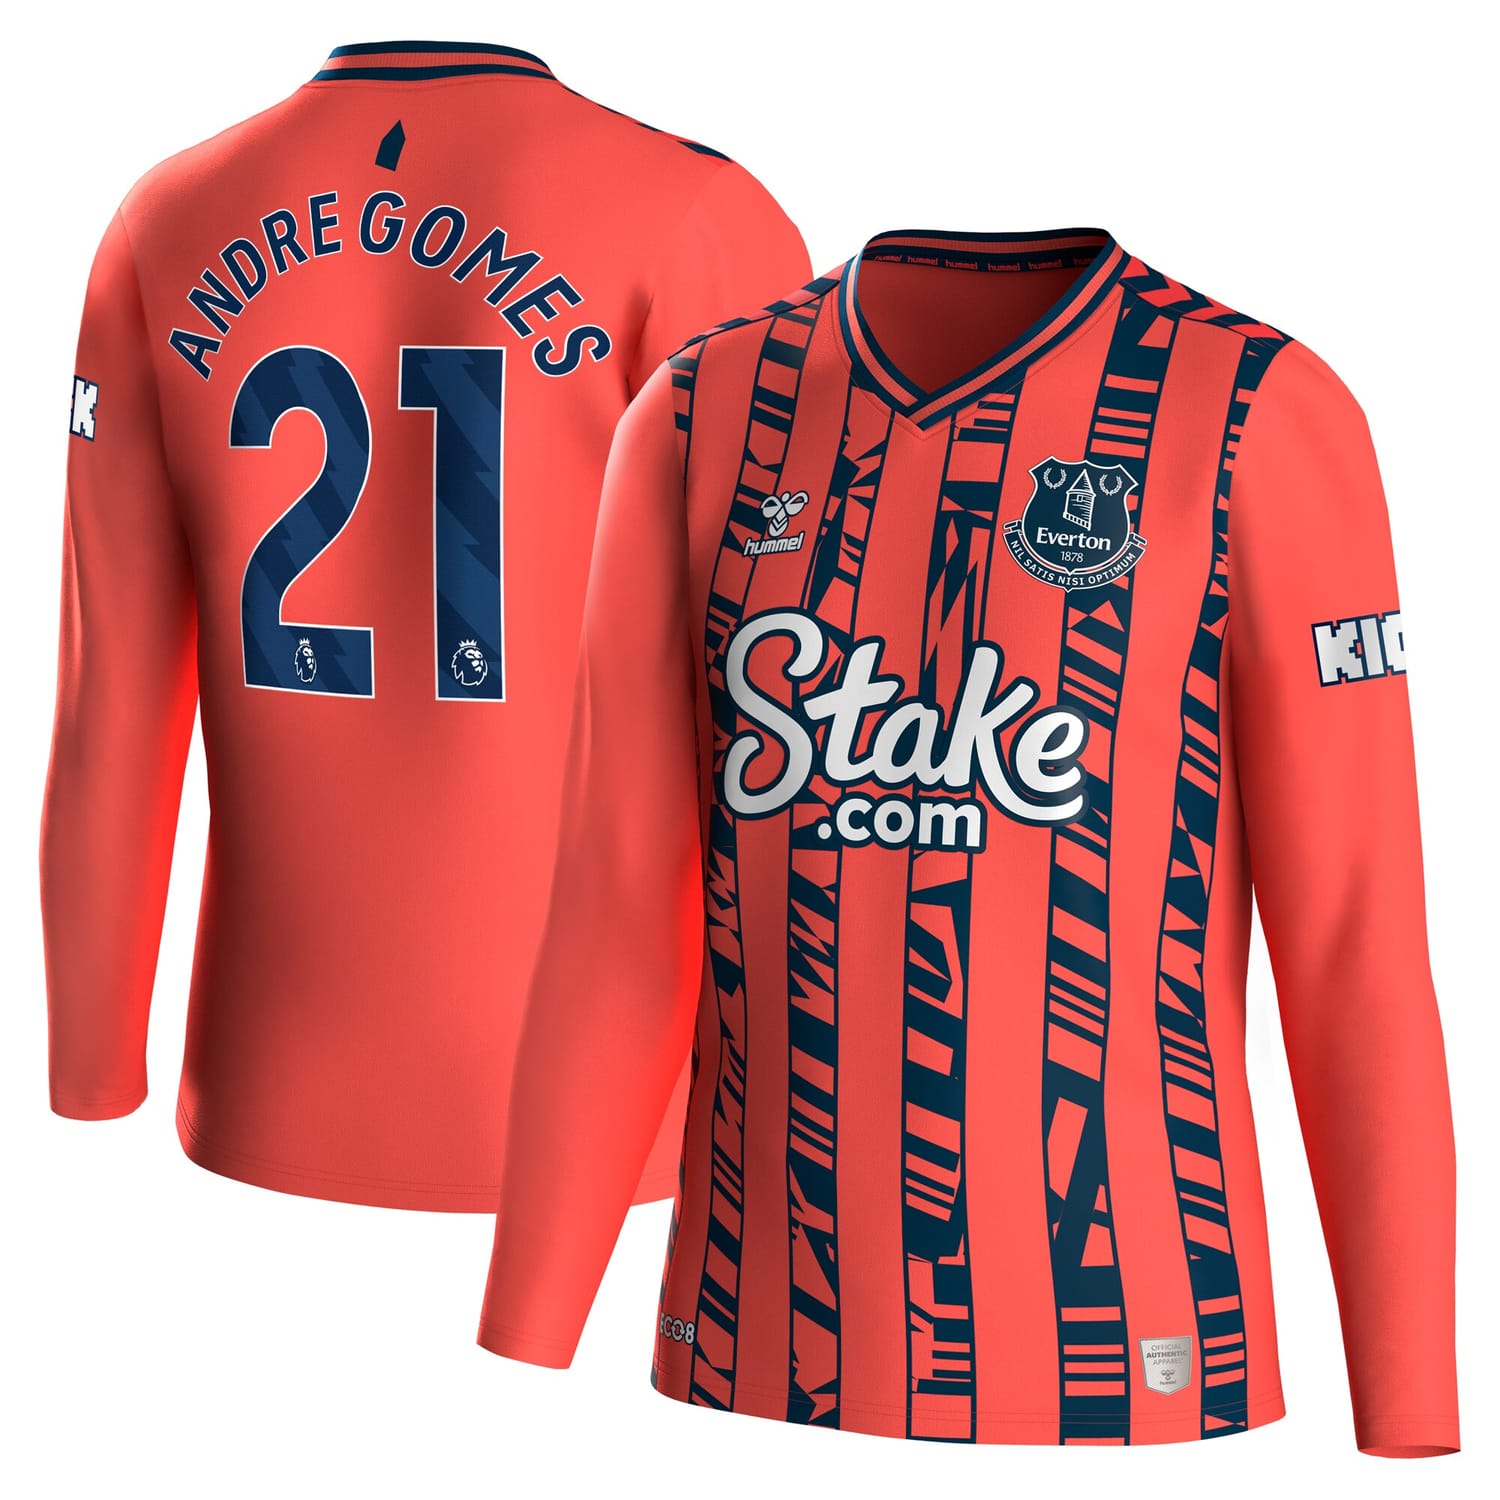 Premier League Everton Away Jersey Shirt Long Sleeve 2023-24 player Andre Gomes 21 printing for Men